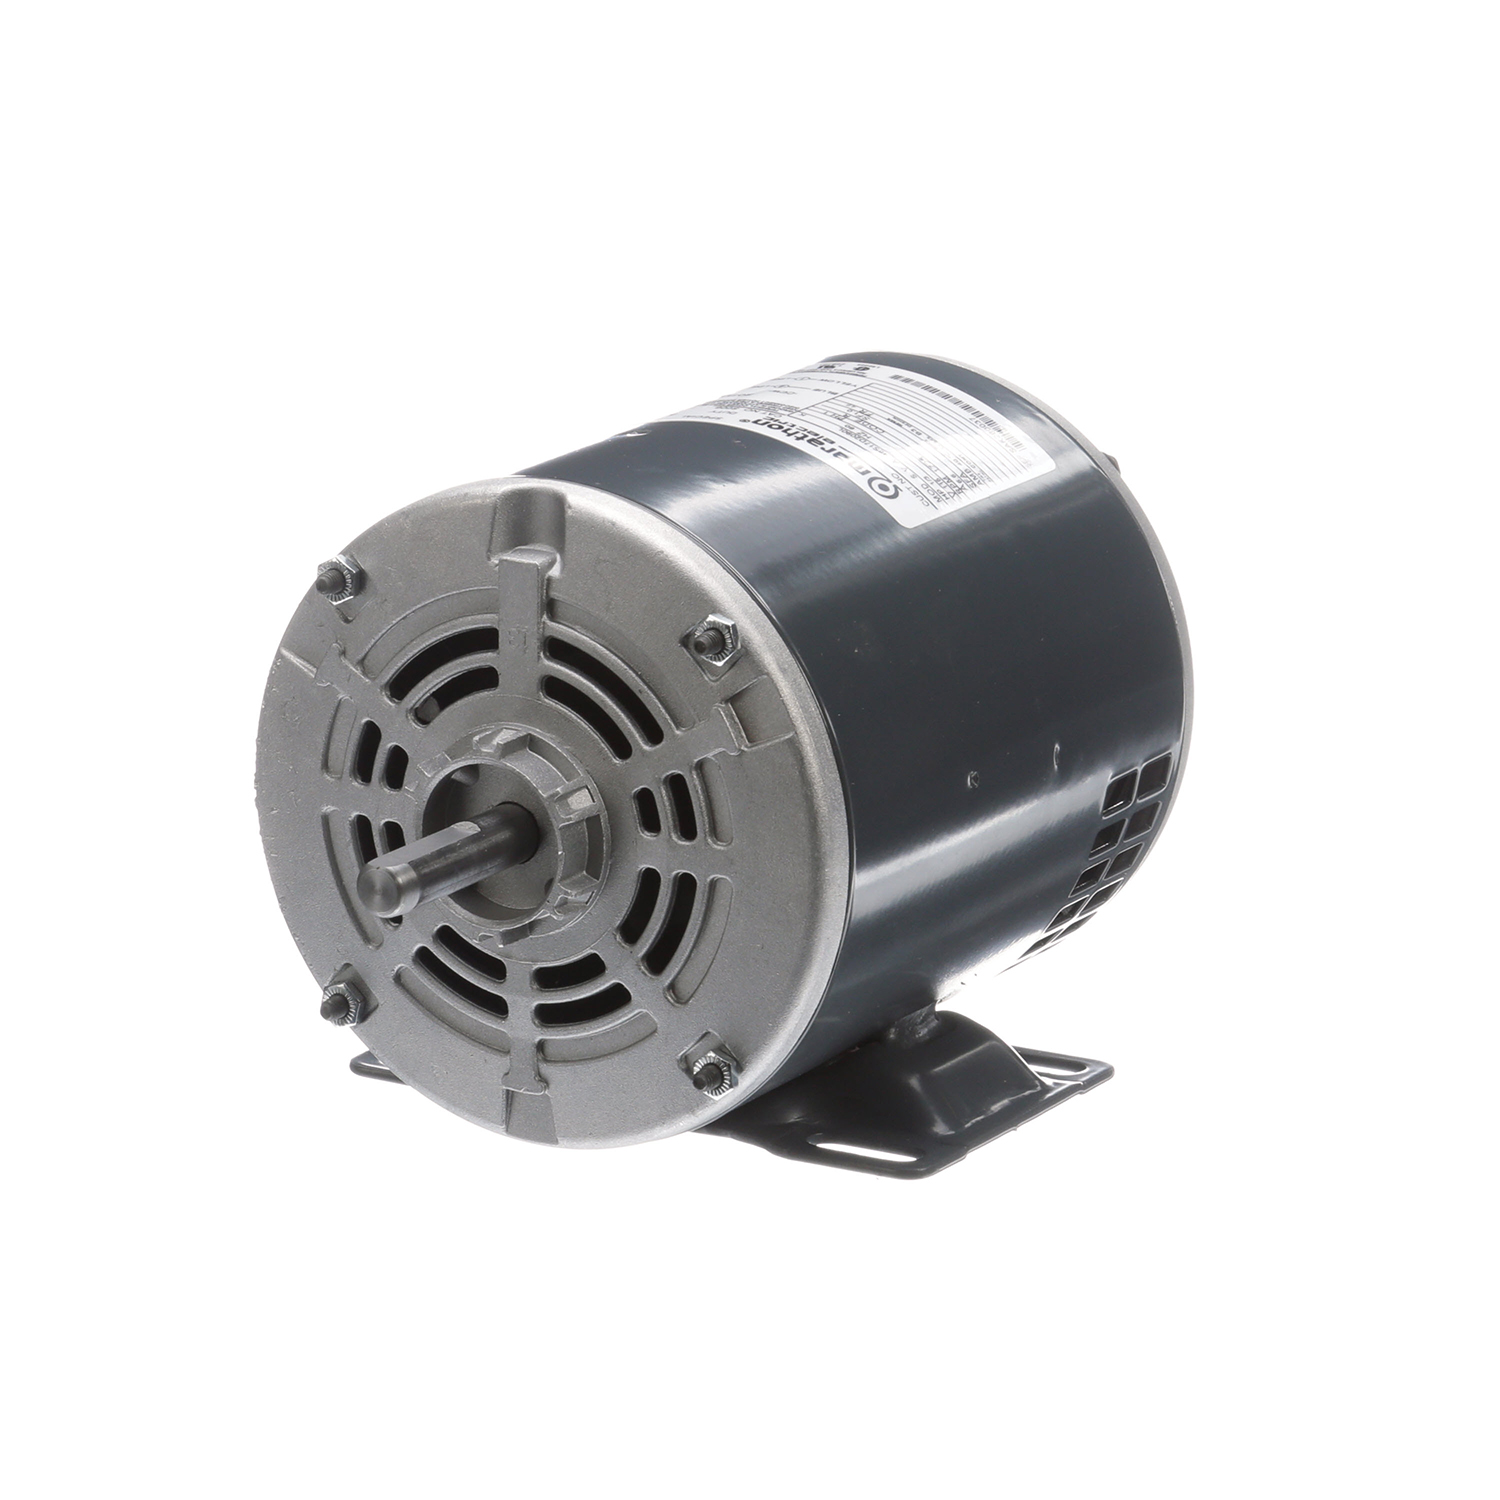 48 Frame Split Phase Special Purpose Motor, 1/3 HP, 1725 RPM, 115 Volts